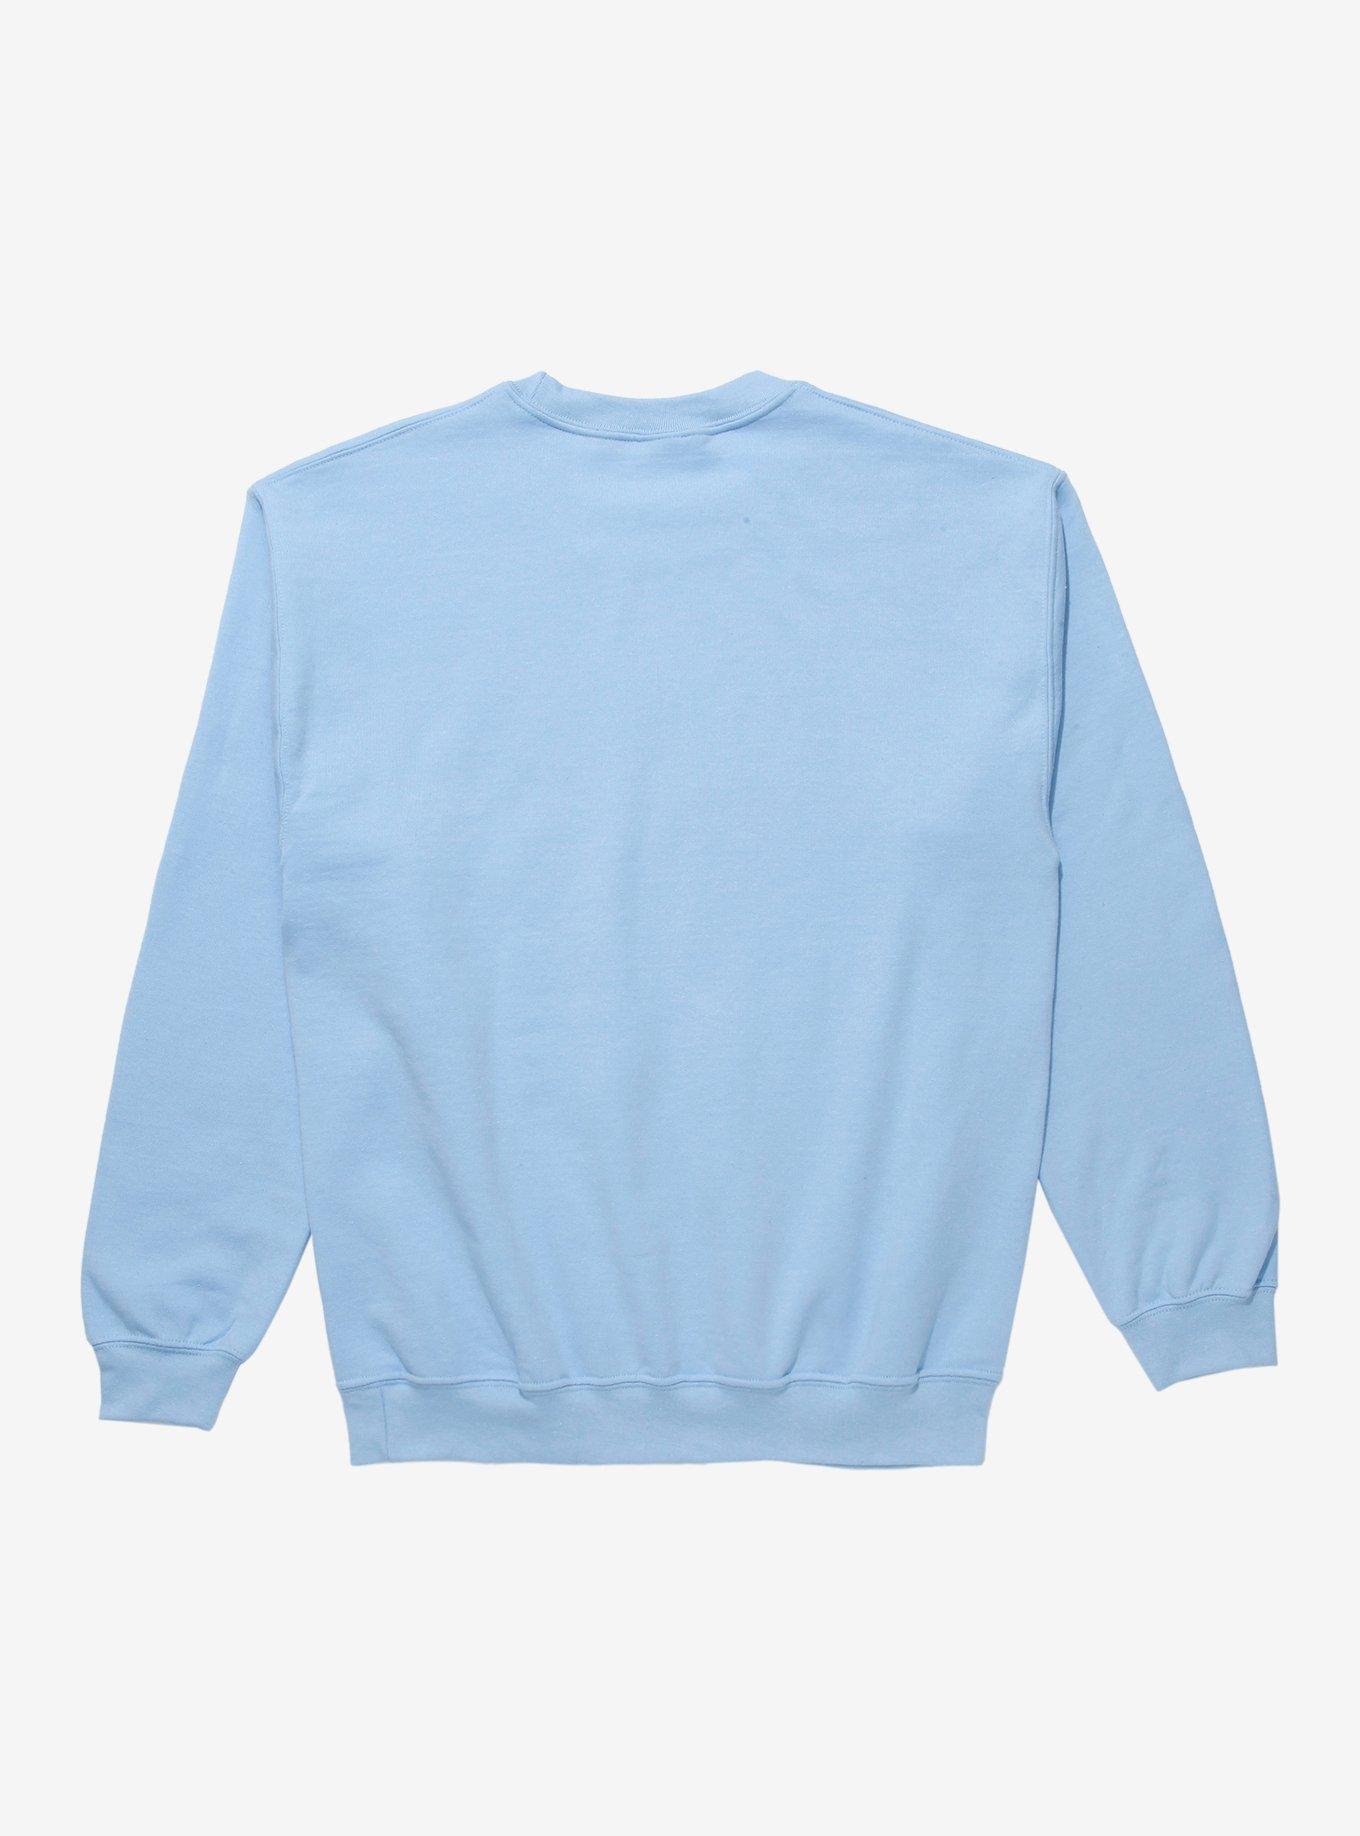 Avatar: The Last Airbender Air Nomads Sky Bisons Crewneck - BoxLunch Exclusive, LIGHT BLUE, alternate